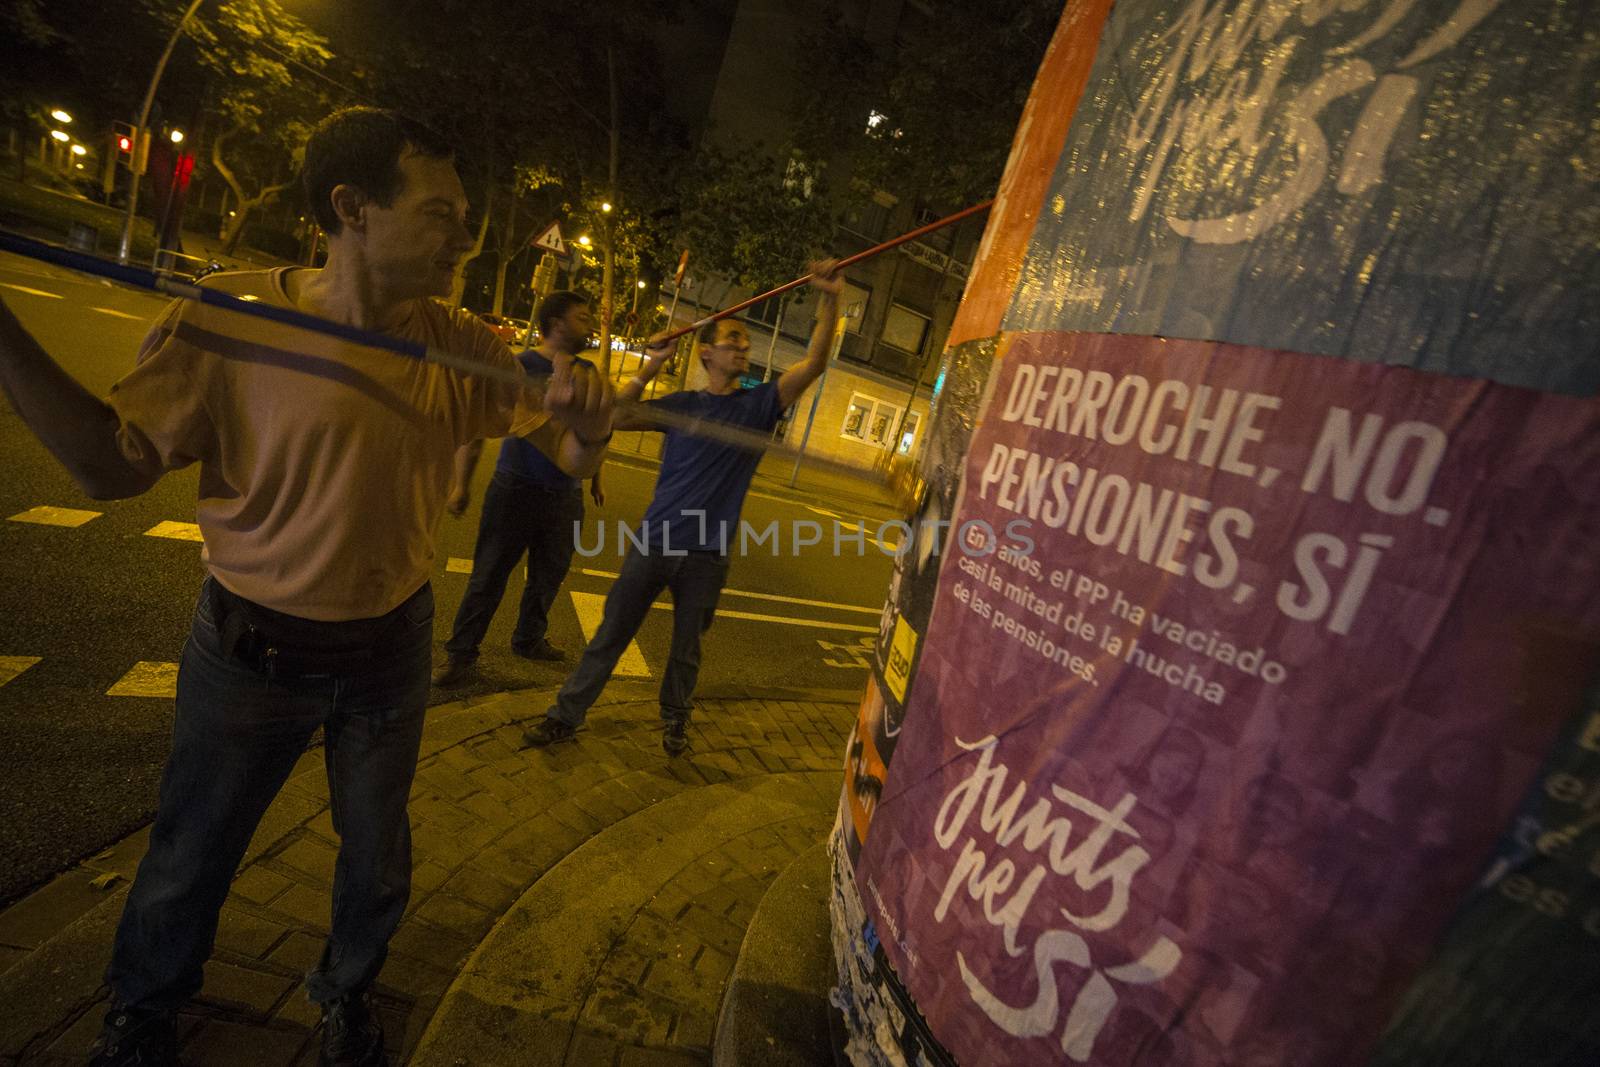 SPAIN, Barcelona: Activists from the pro-independence coalition Junts pel Si (Together for Yes) stick up posters around Barcelona on the evening of September 16, 2015. Pro-independence groups are rallying their supporters ahead of the Catalonian parliamentary election, taking place on September 27.